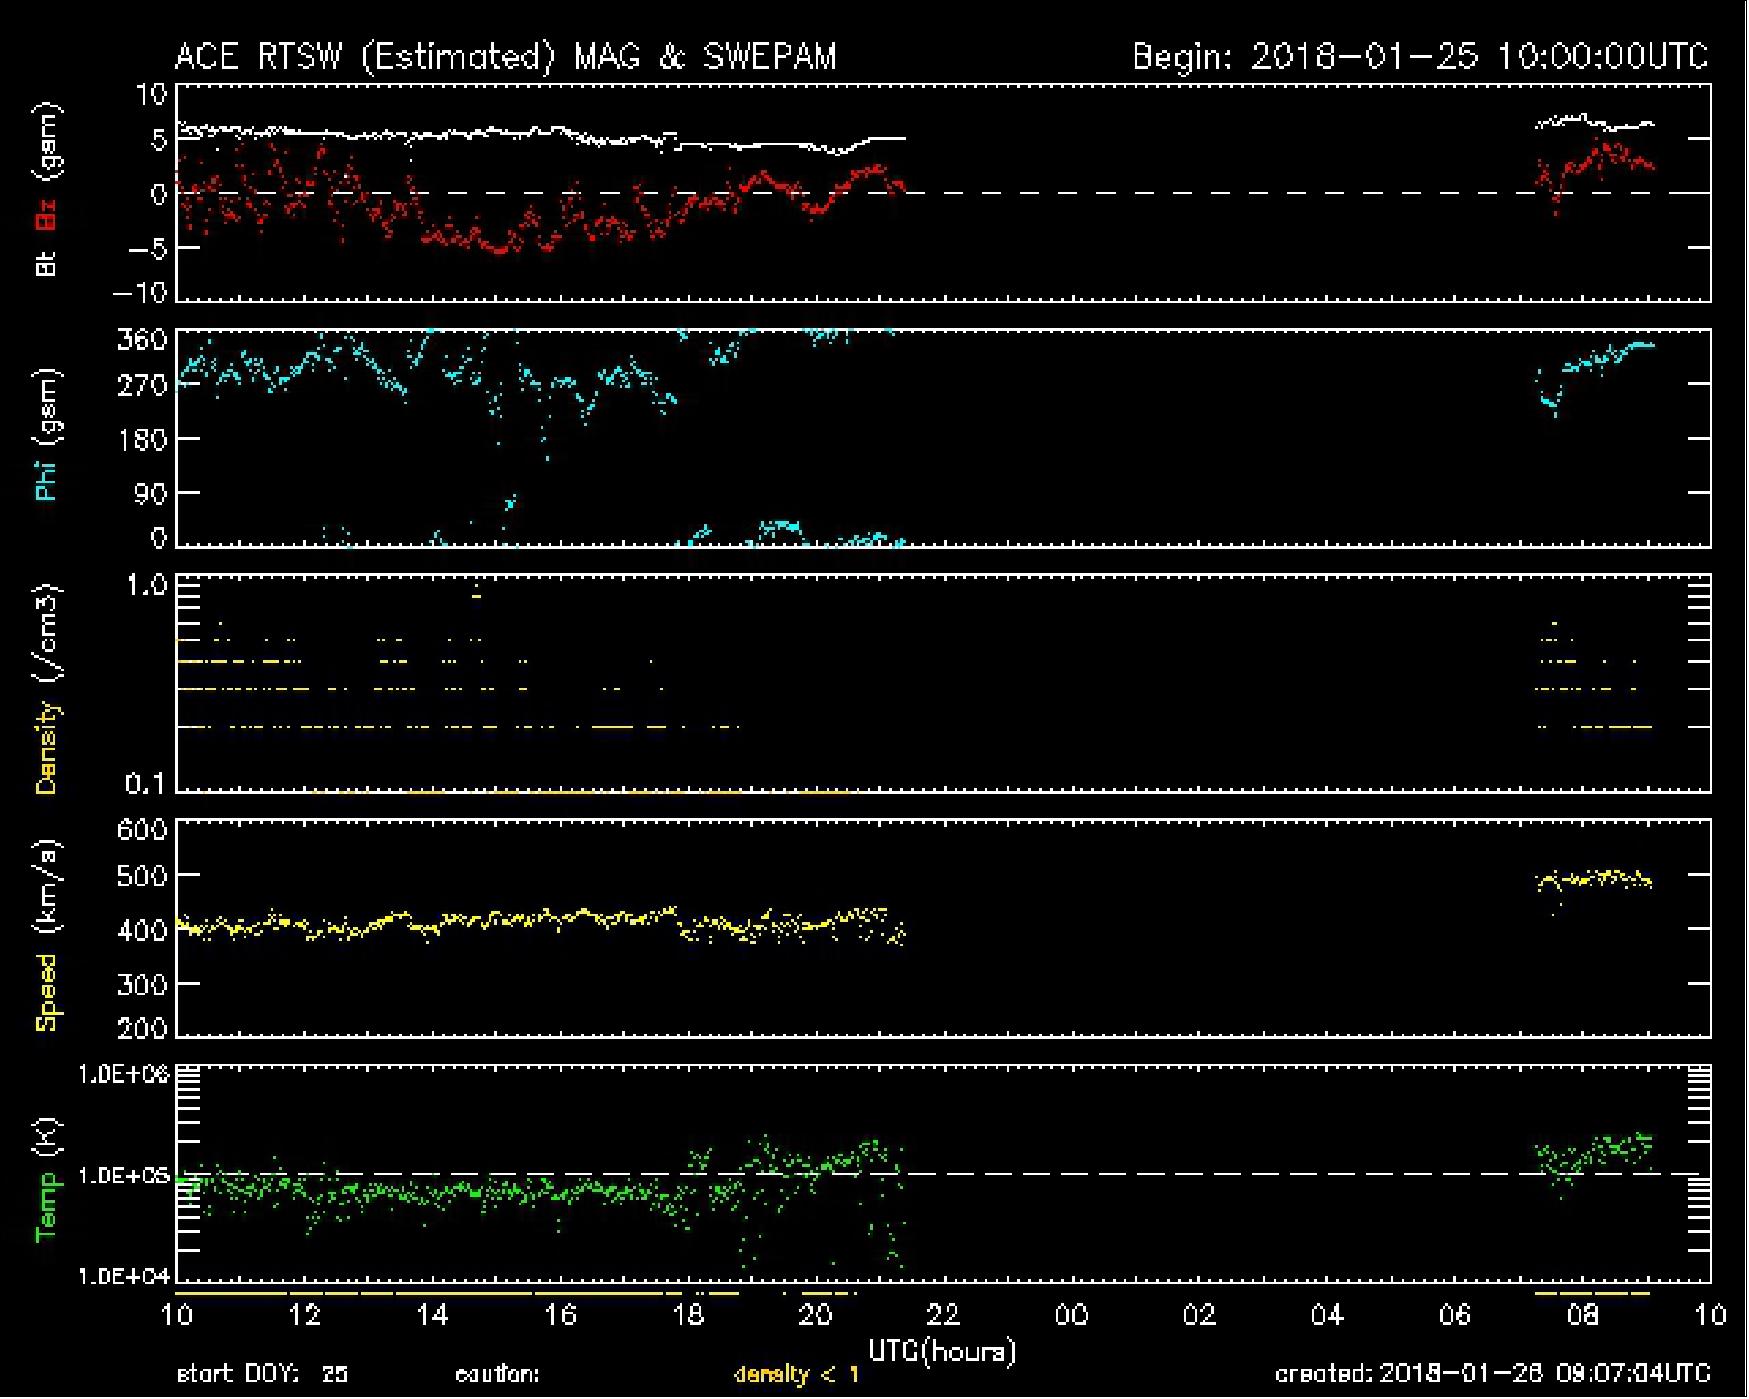 Figure 8: ACE realtime parameters of the solar wind as of 25 January 2018 (image credit: NOAA/SWPC)